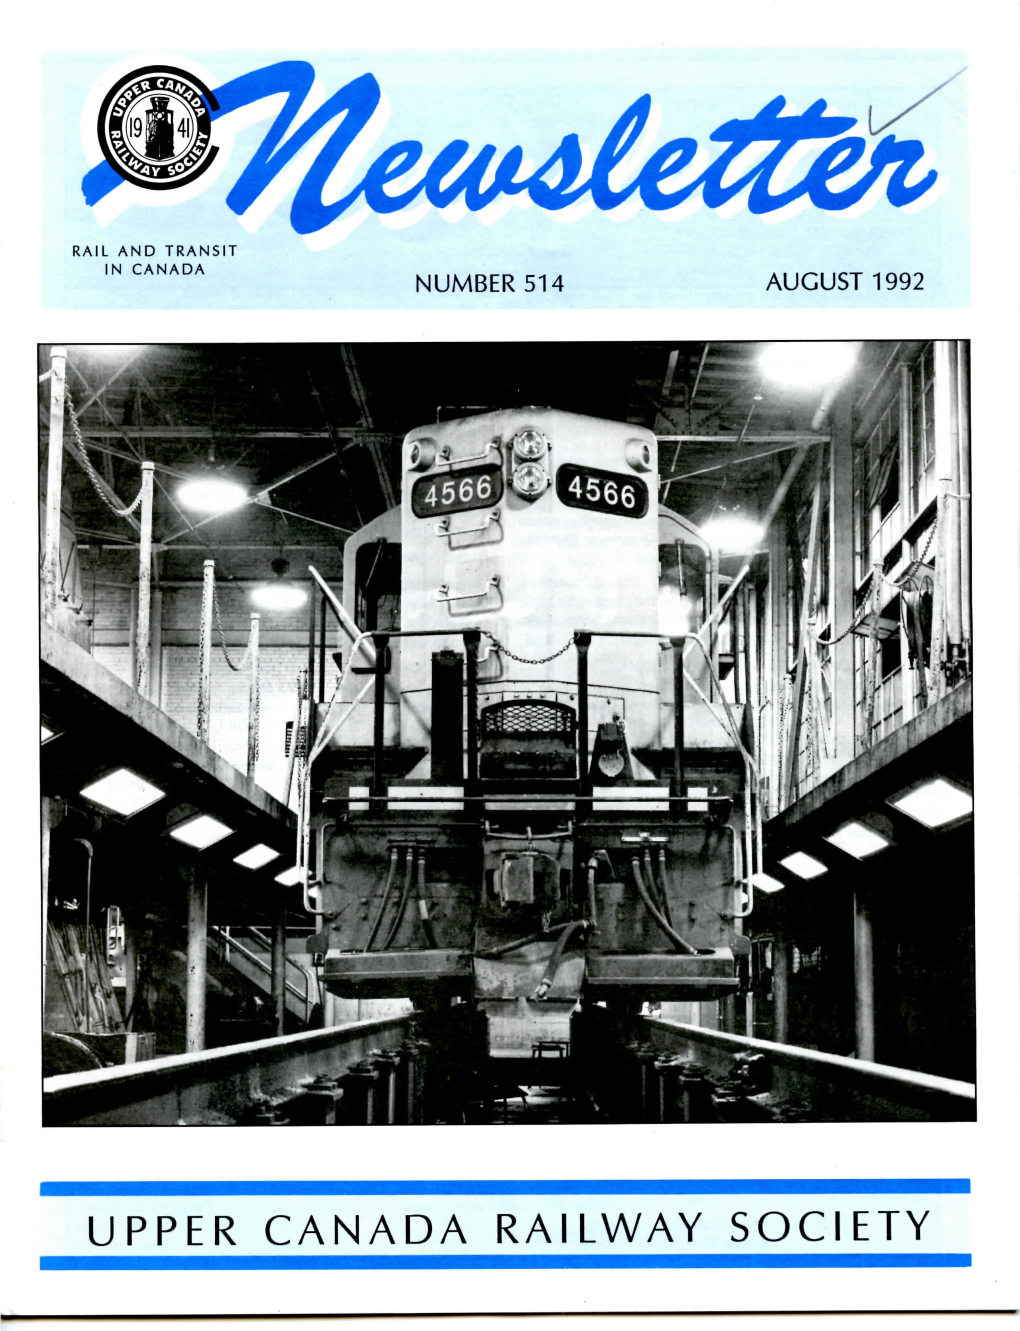 UPPER CANADA RAILWAY SOCIETY 2 « UCRS Newsletter « August 1992